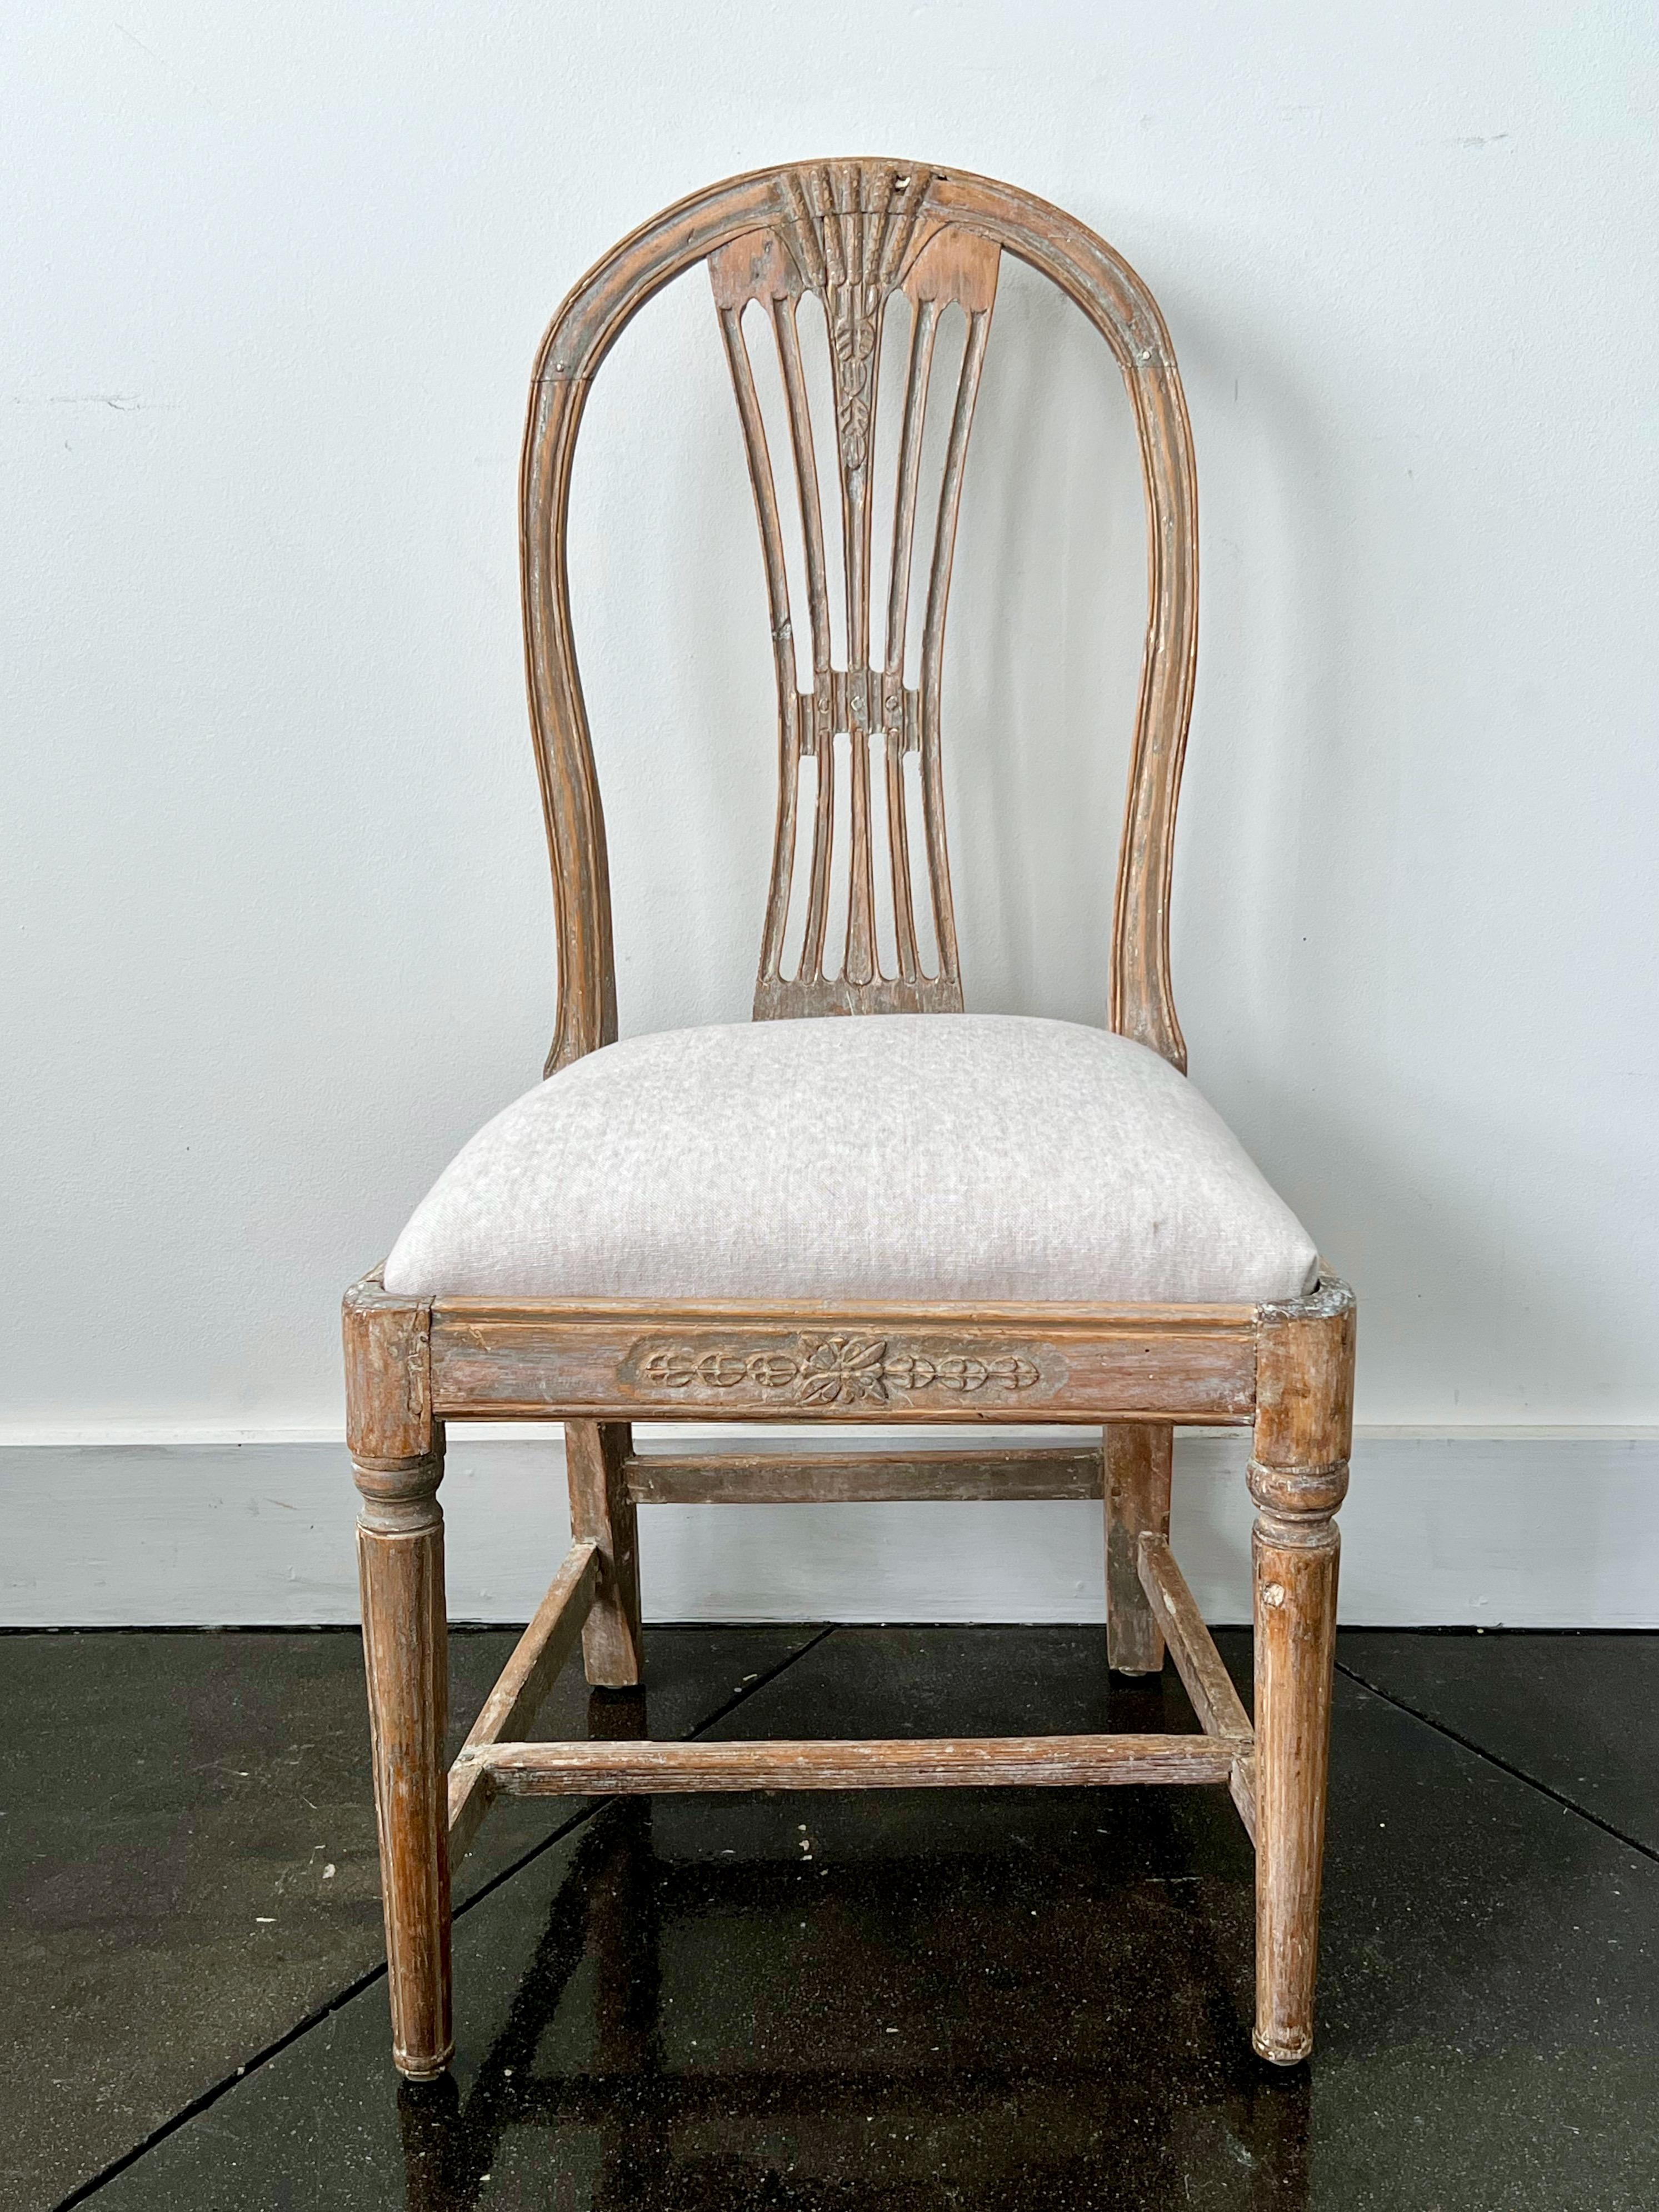 18th century Swedish Gustavian period side chair hand-scraped to its most original paint, with oval back, pierced slats and carved wheat sheaf, cross stretcher, and slip seat cover in linen. 
NOTE:
We have other 18th century period single chair very